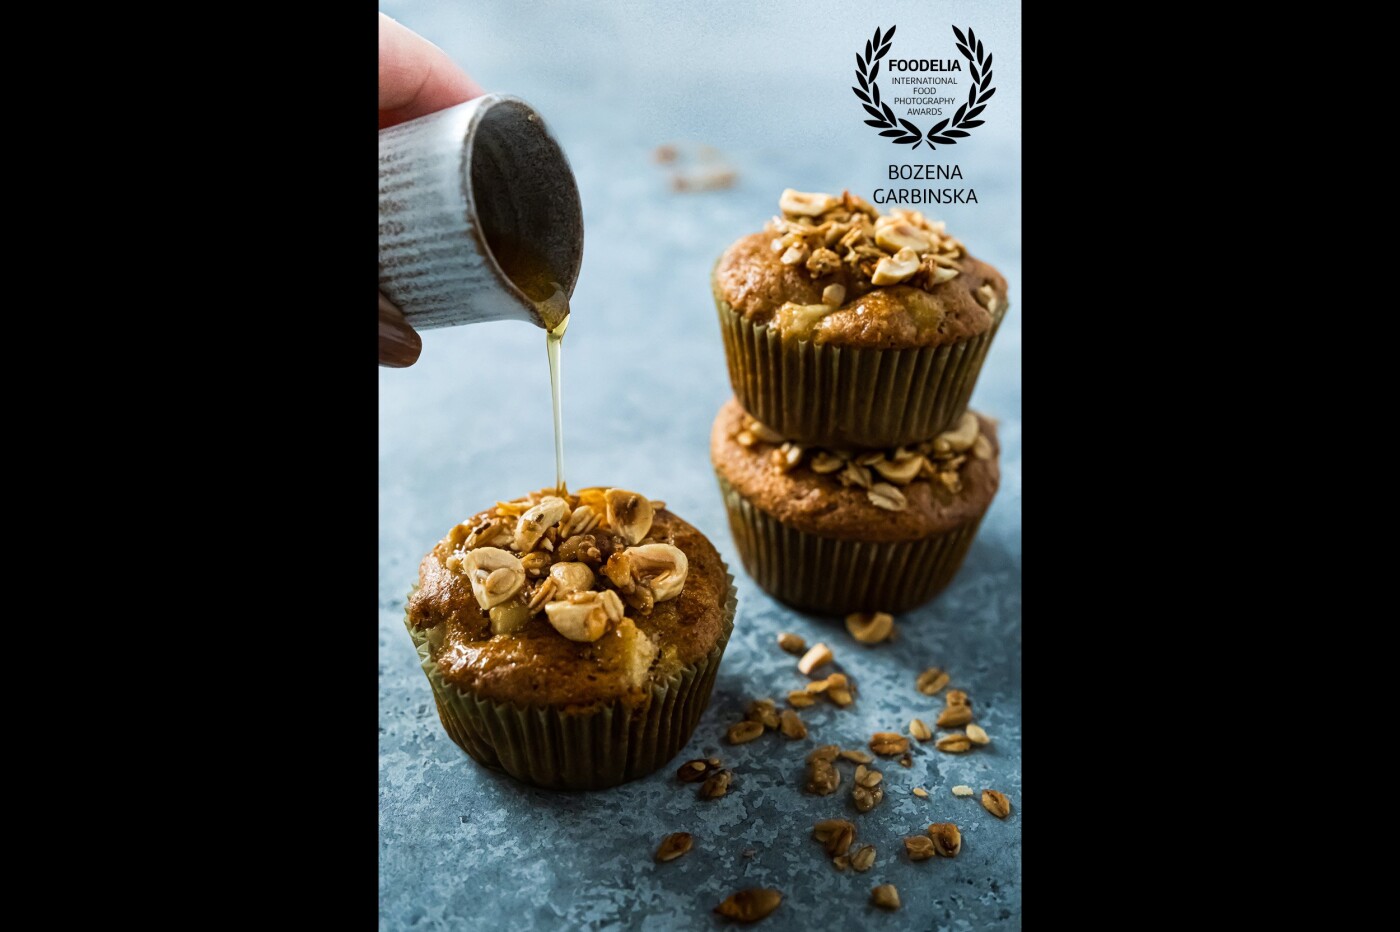 Oats muffins with apple and hazelnut sweetened with honey and tagatose<br />
Camera: Fuji X-T3<br />
Lens: Fujinon 16-55 mm<br />
Shot using natural light.